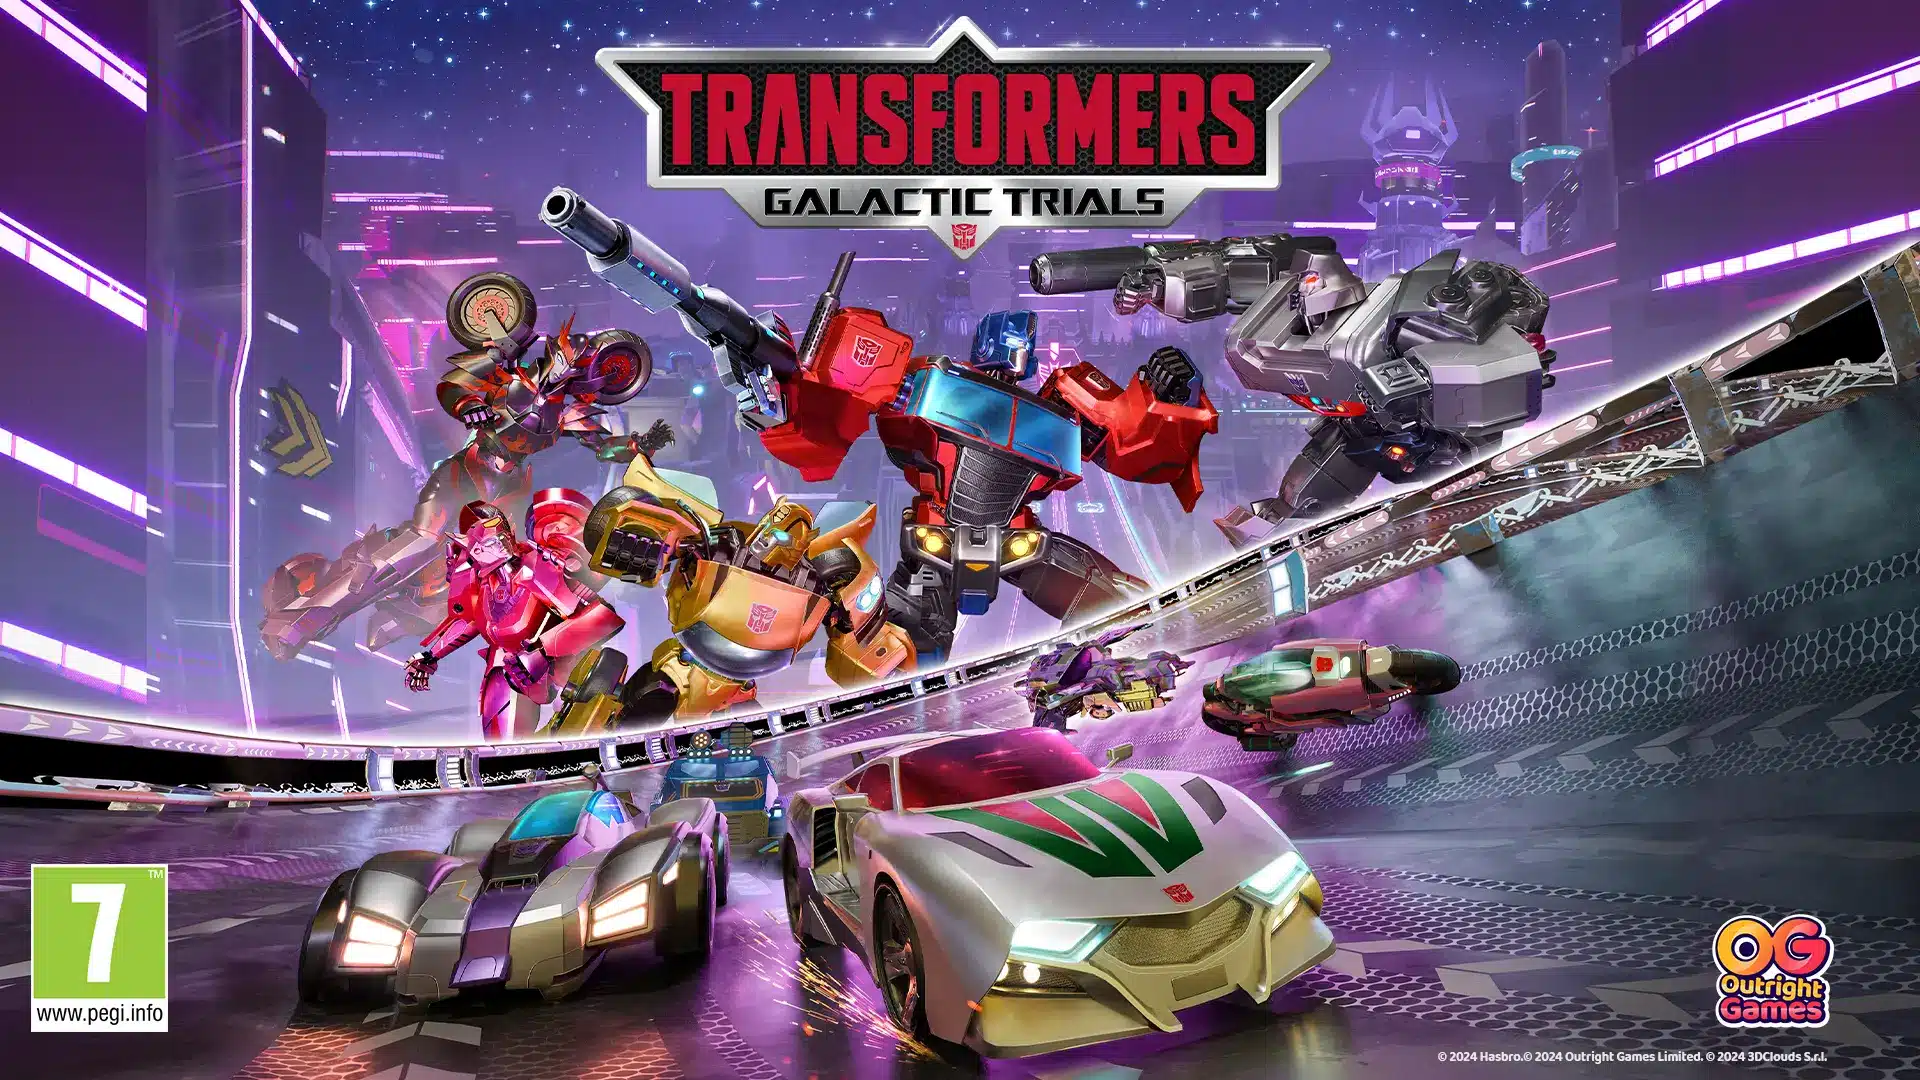 TRANSFORMERS: Galactic Trials: Arcade Racing and Fighting Game Announced for Nintendo Switch